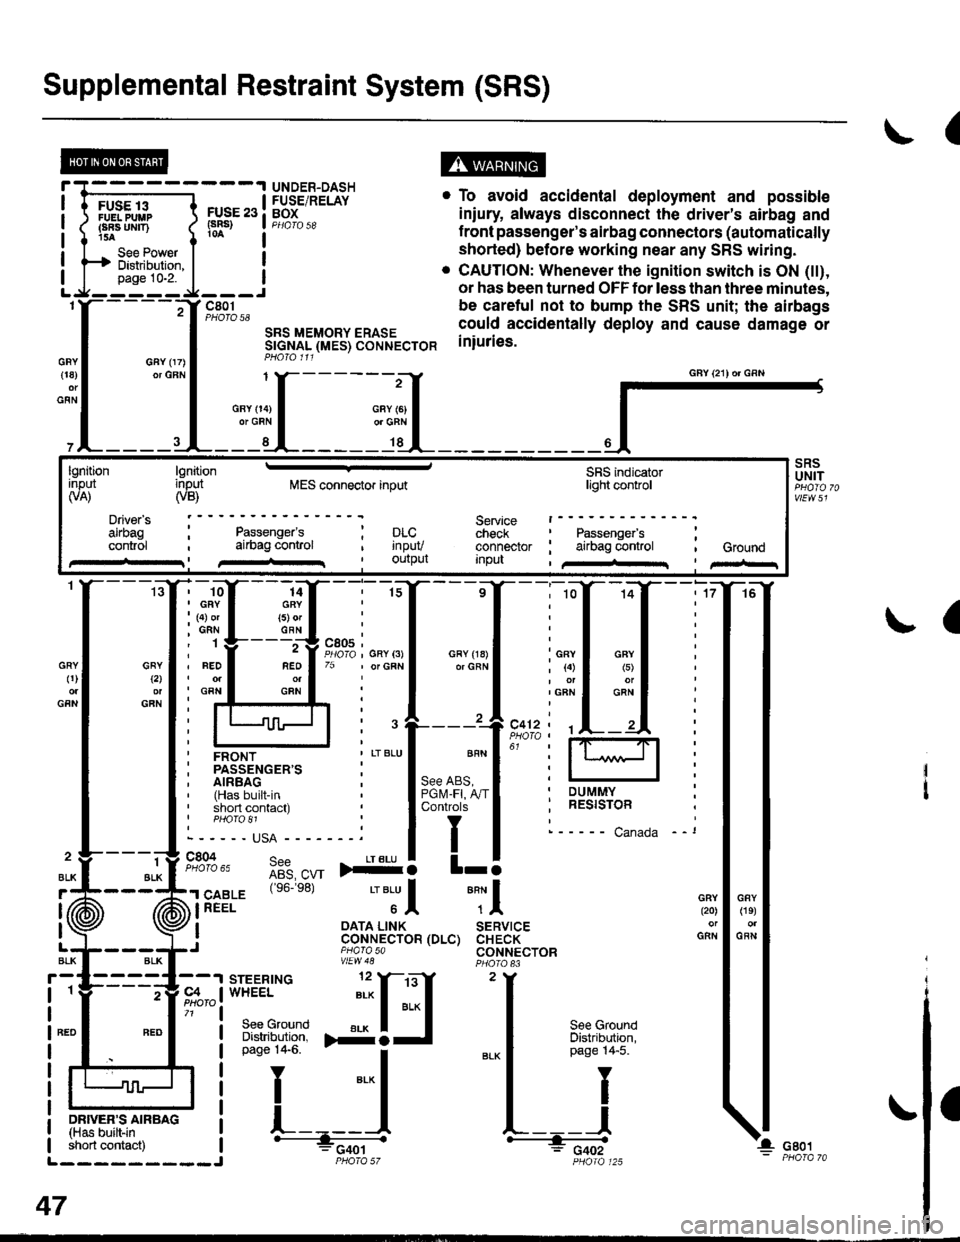 HONDA CIVIC 1996 6.G User Guide Supplemental Restraint System (SRS)
(
FUSE 13FUELPUUPFBA UMT)15A
See PowerDistibution,page 10-2.
FUSE 23(sRs)
c801PHOTO 58
SRS MEMORY ERASESTGNAL (MES) CONNECTORPHO|O 111
. To avoid accidental deploym